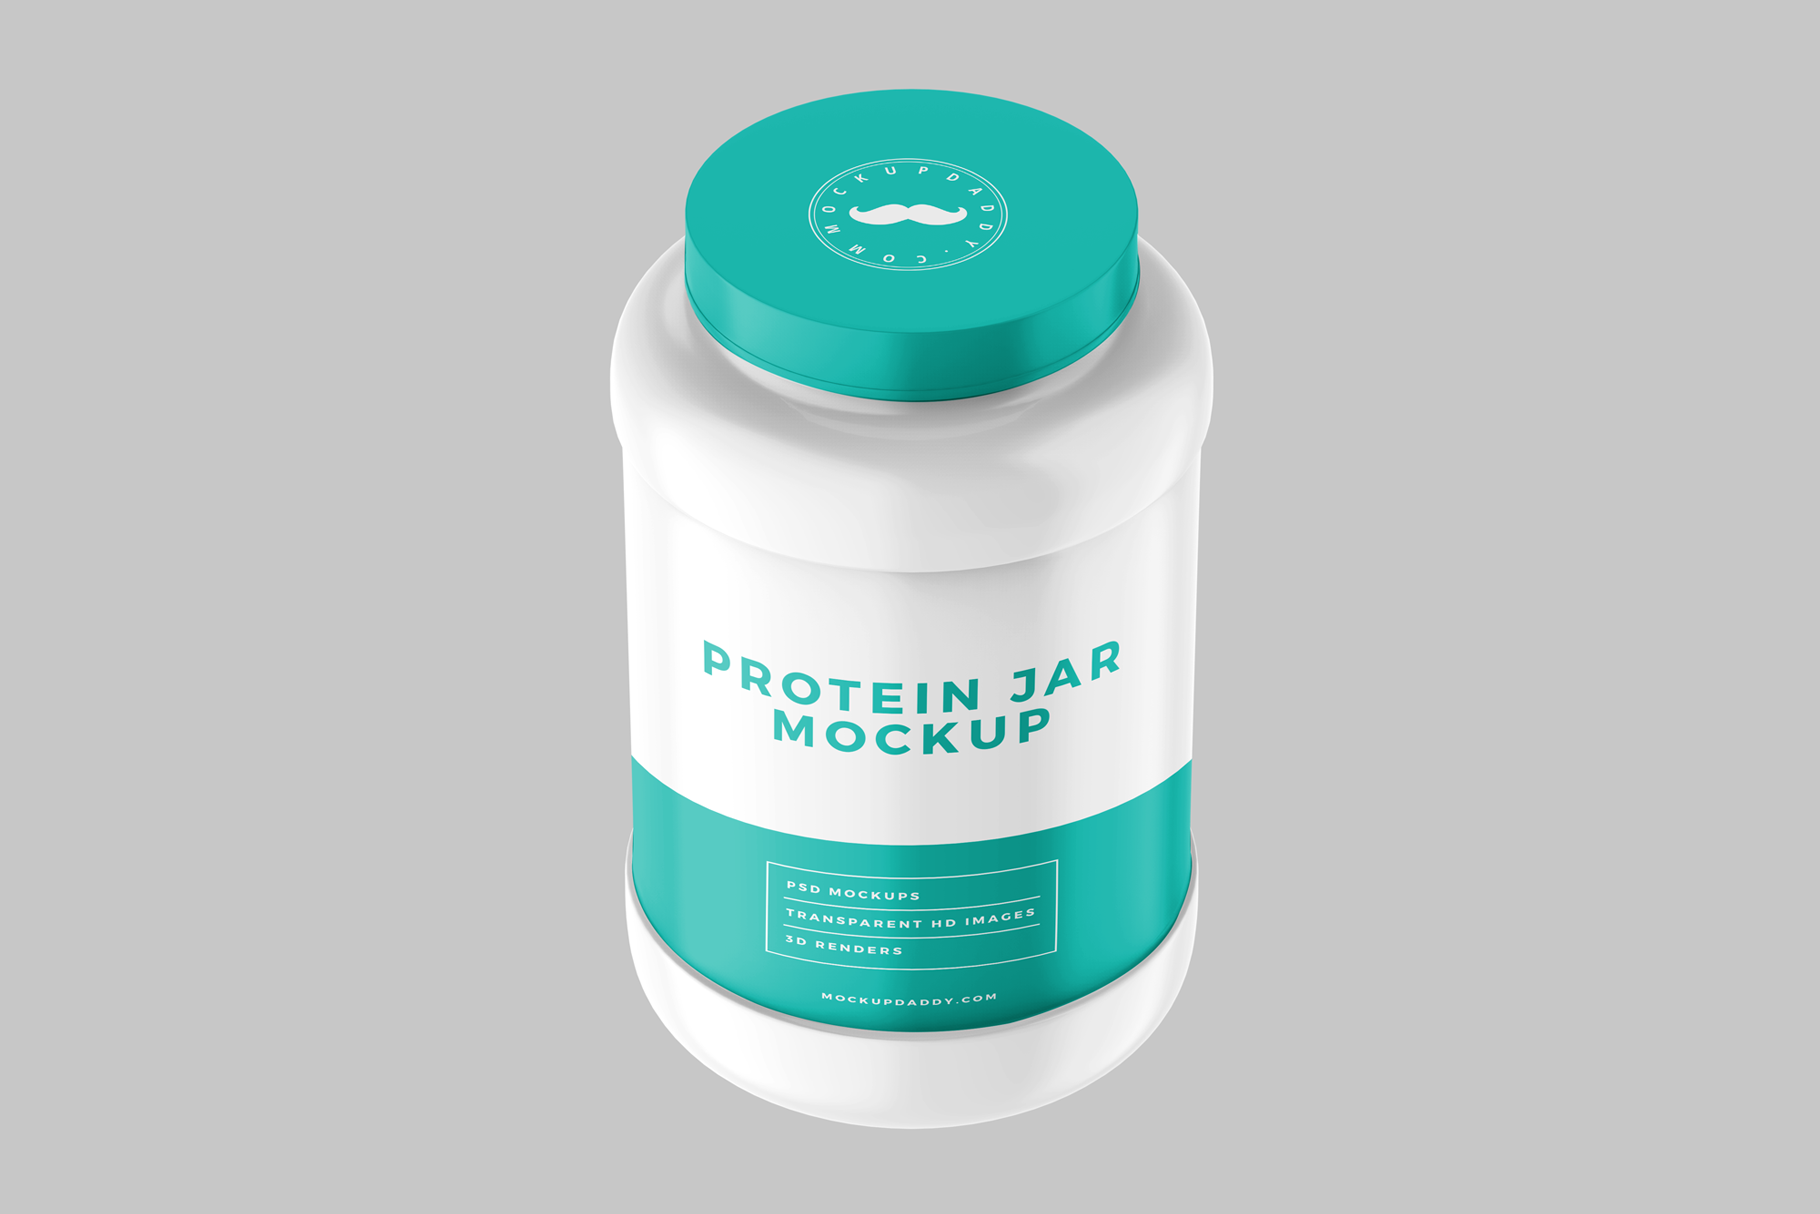 White 3D Supplement Mockup with green label and lid